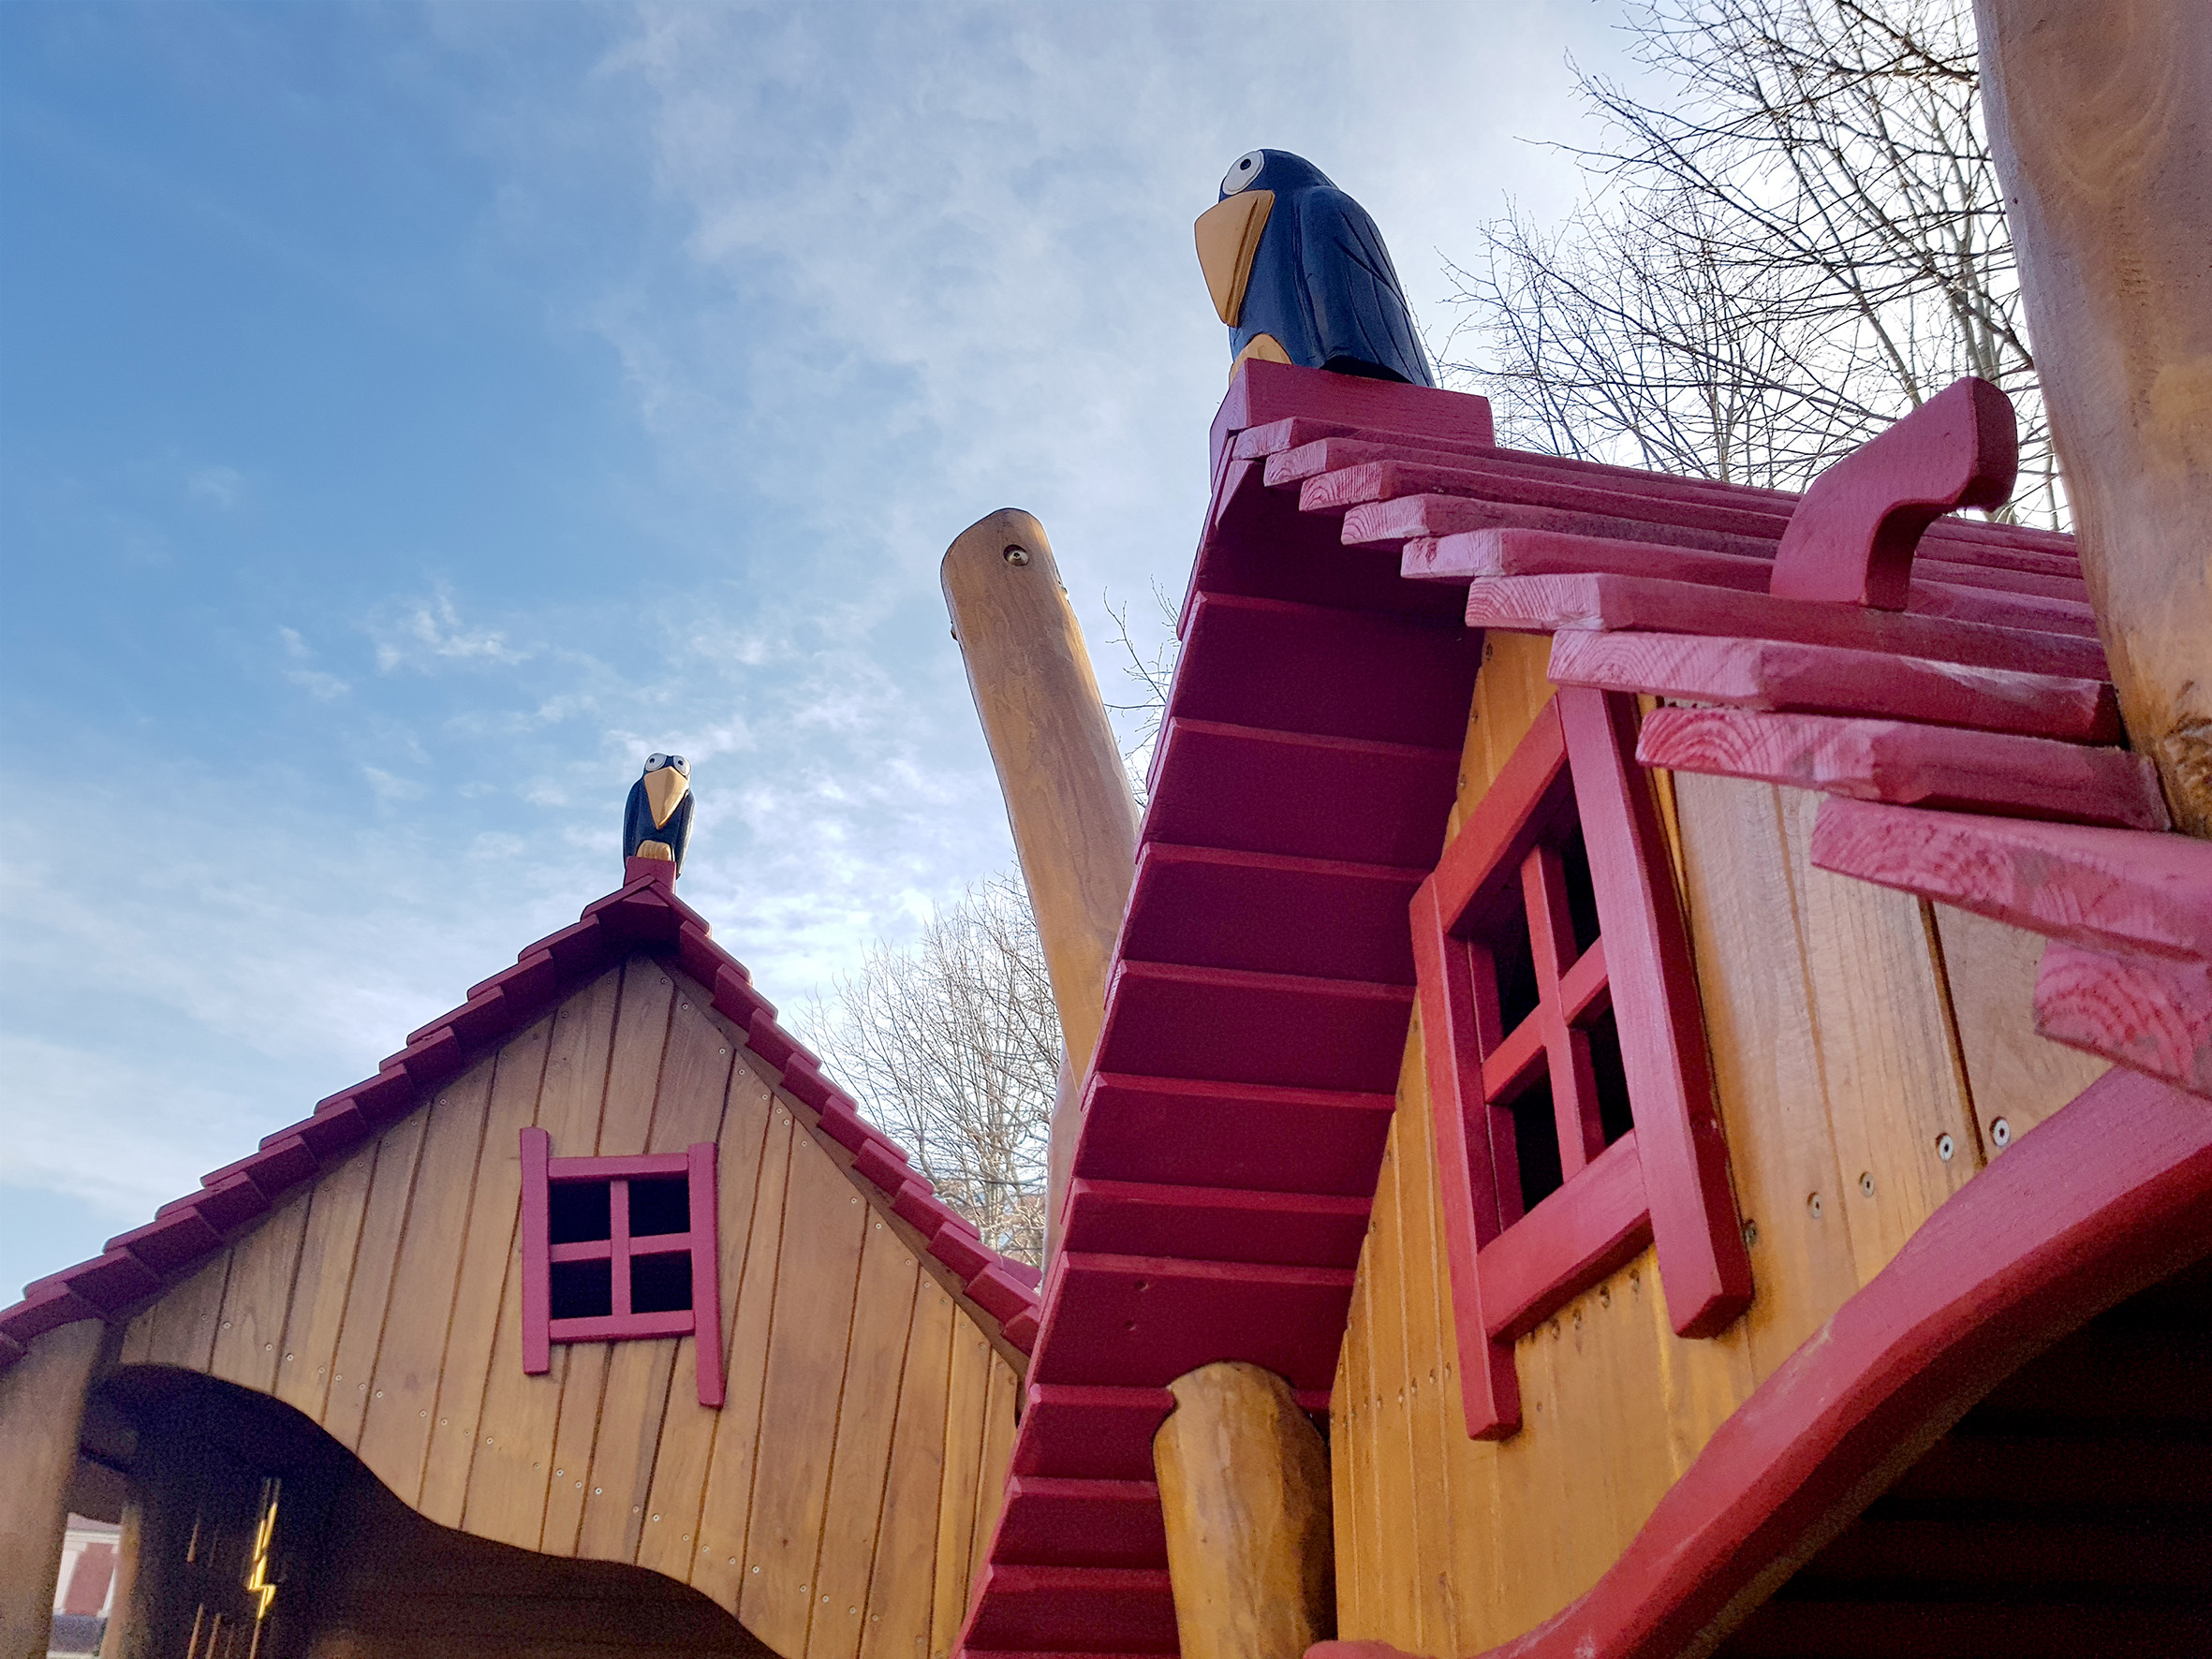 Timber playhouse roofs and bird carvings